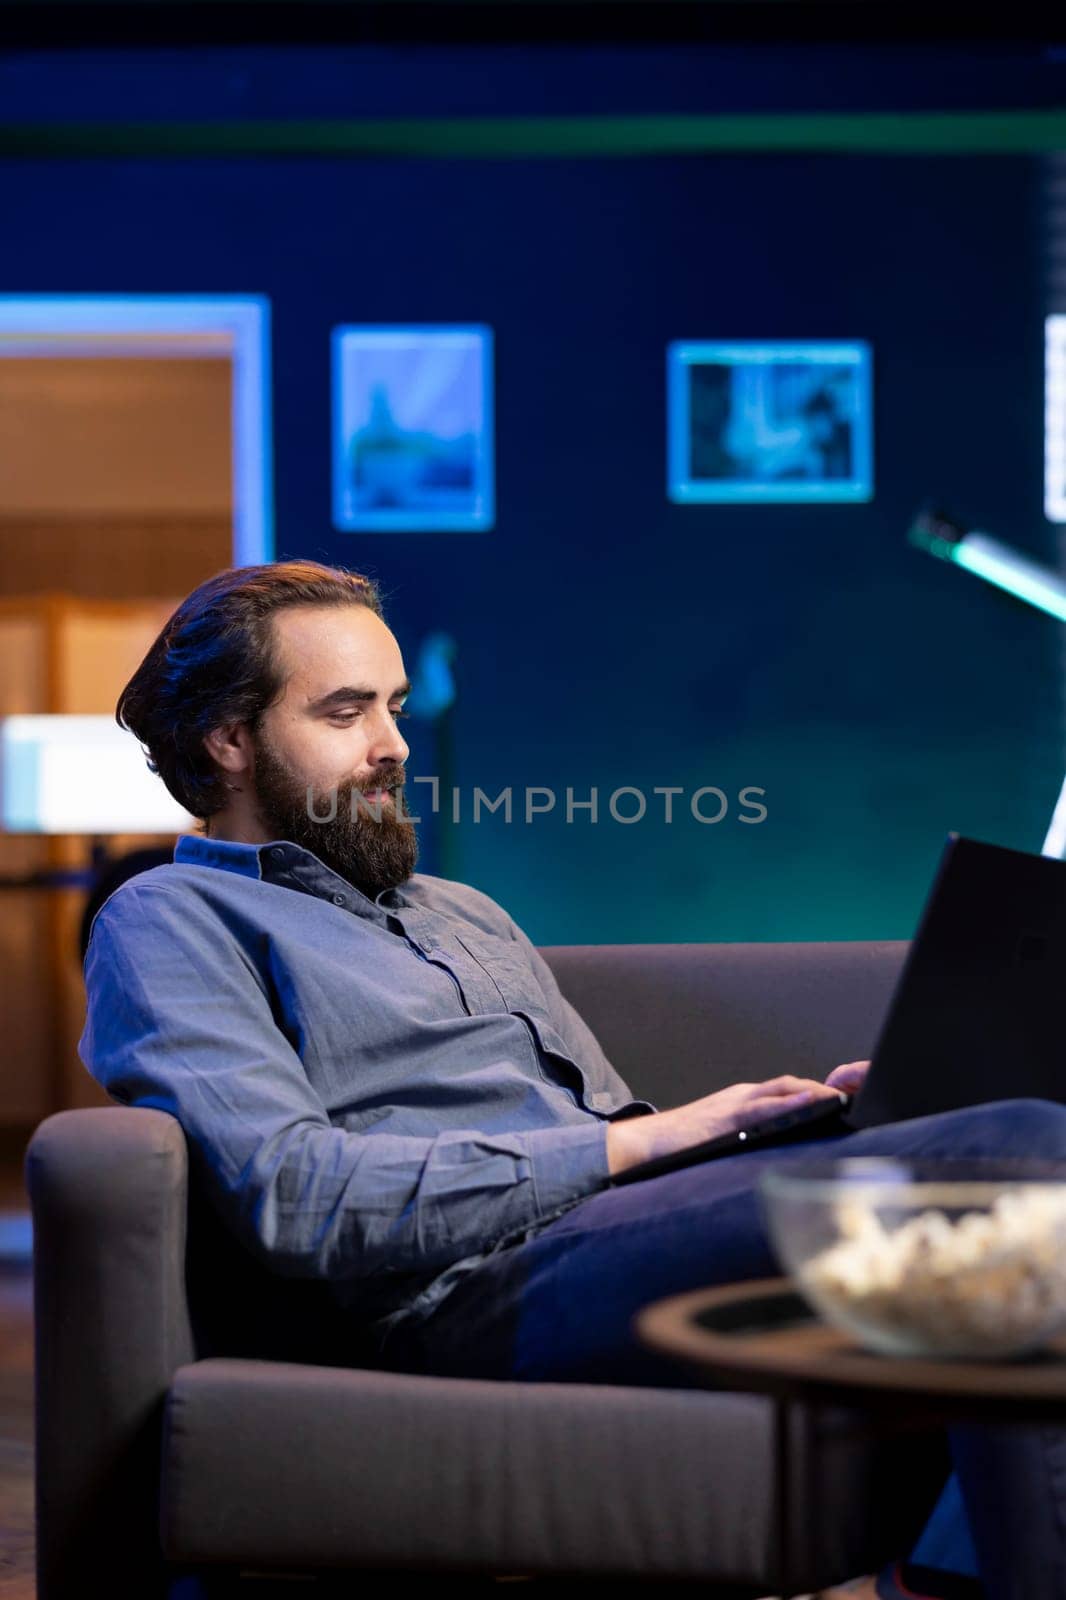 Man enjoying popcorn while watching TV and scrolling on social media on laptop by DCStudio